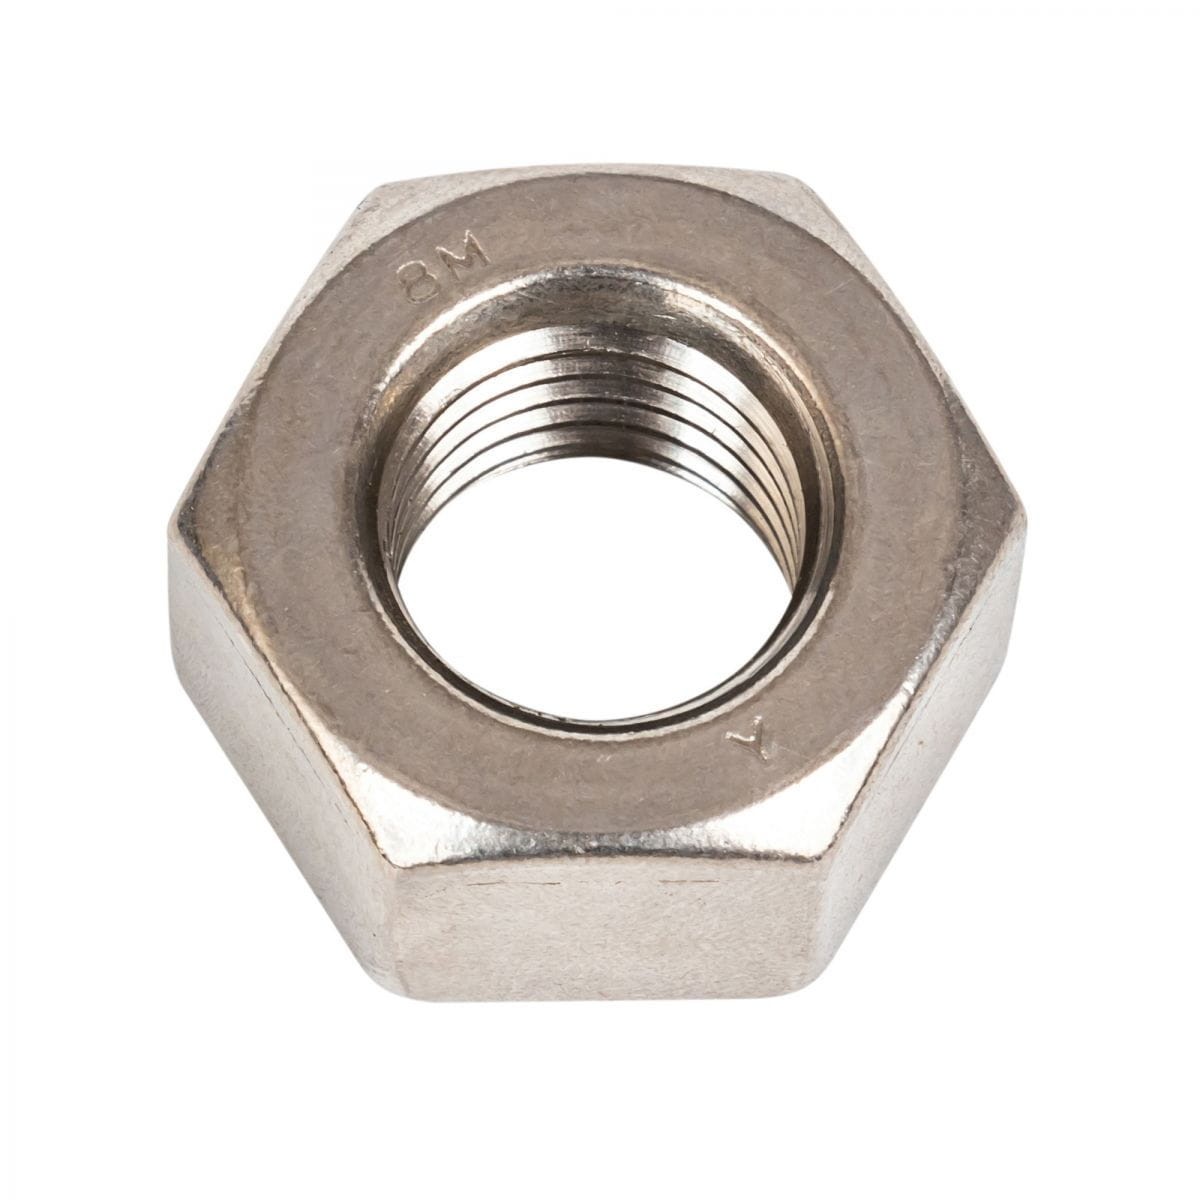 ANSI B18.2.2 Heavy Hex Nut, ASTM A194 8M, 1 Inch, 8 UNC